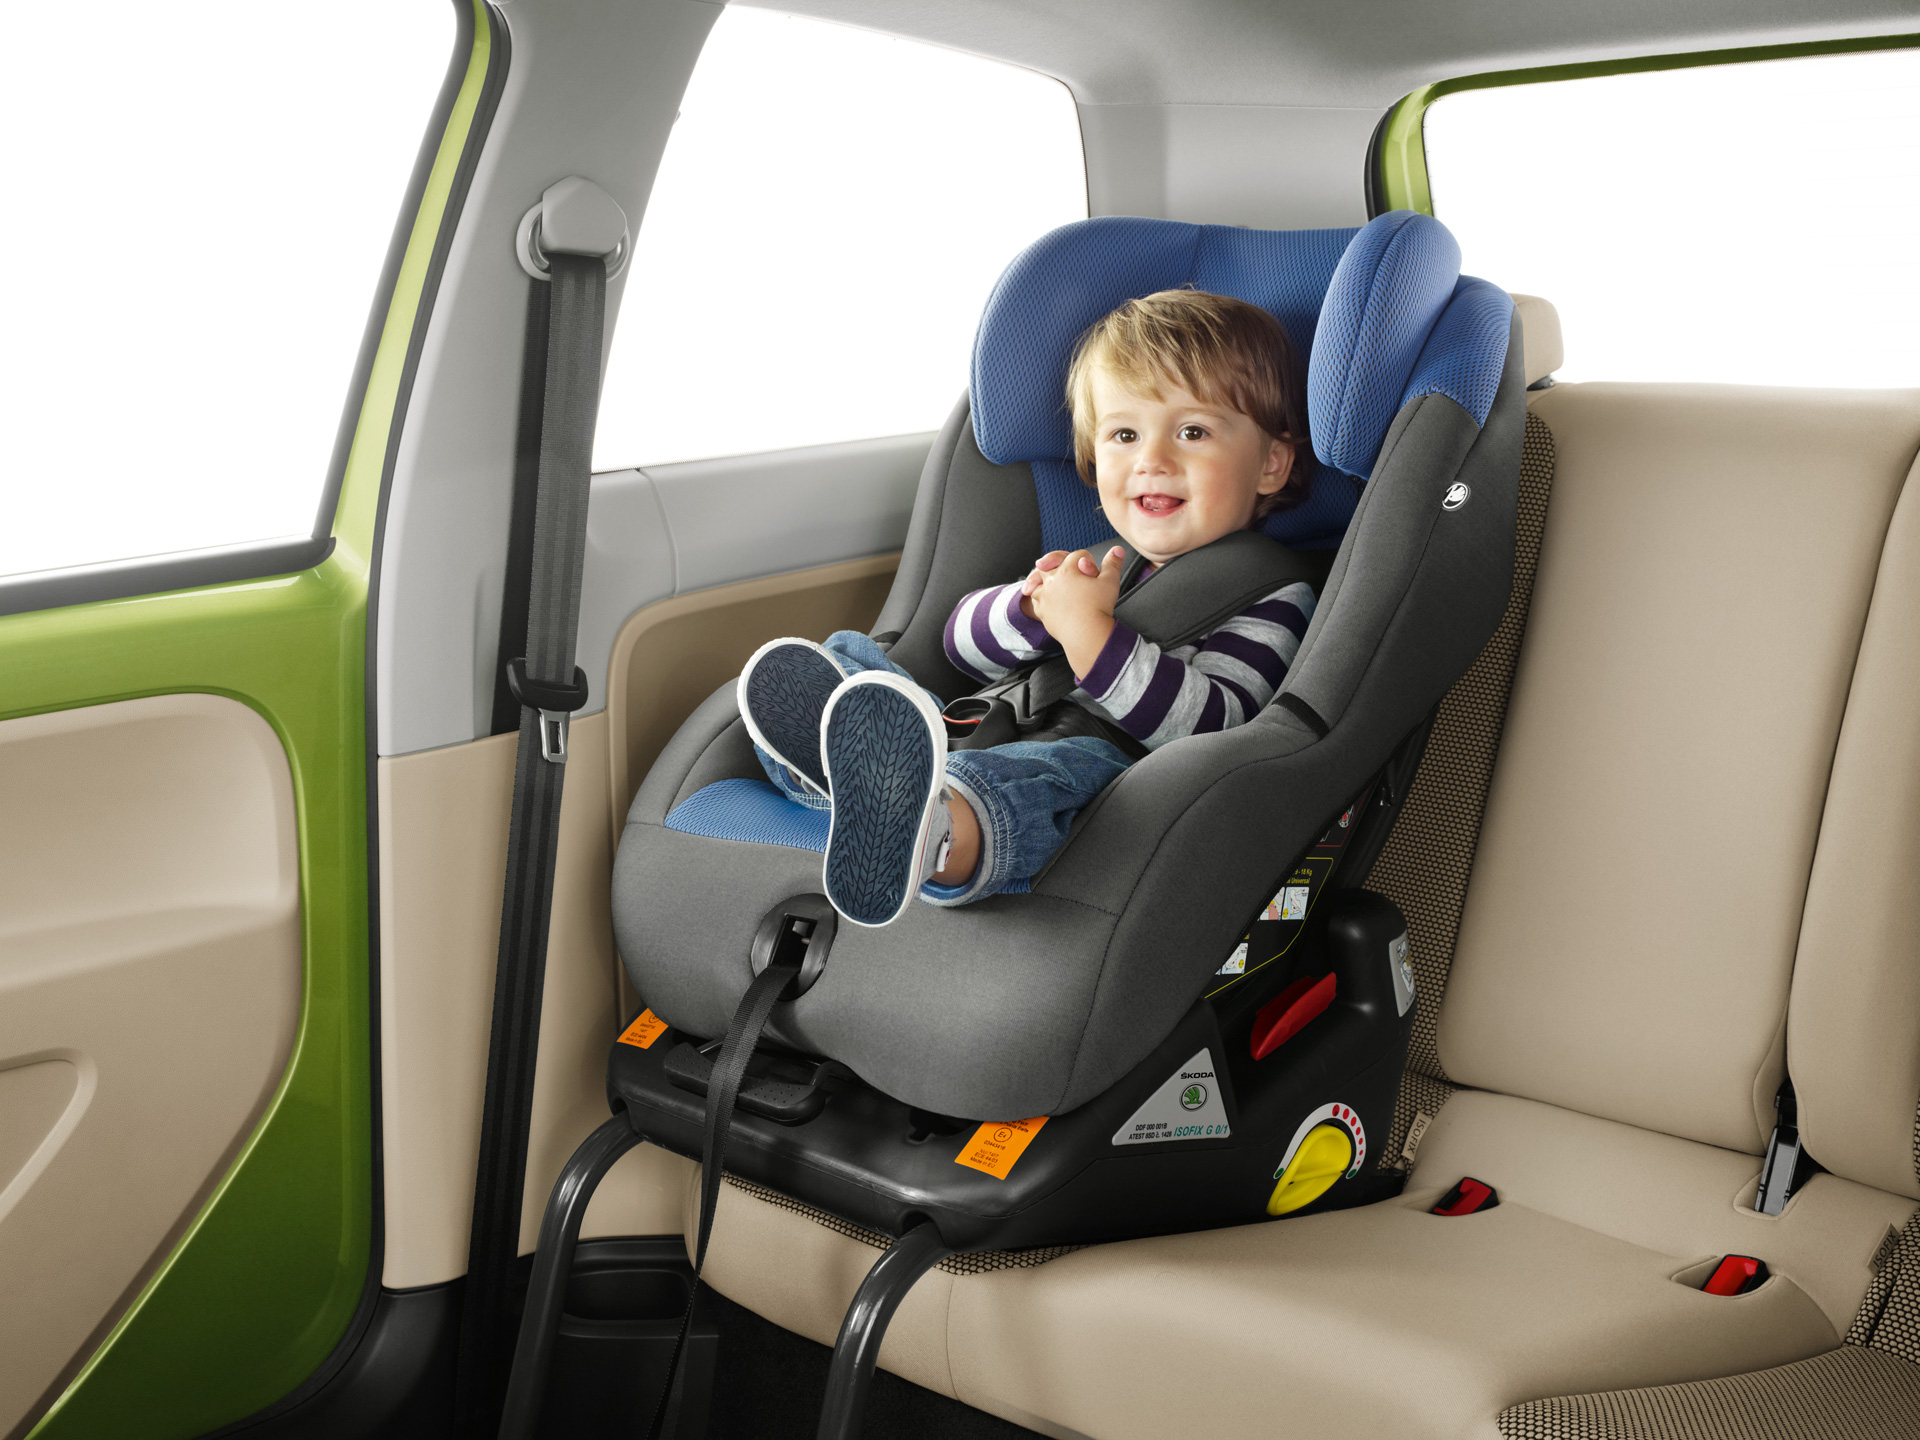 Isofix Car Seats, Does My Car Seat Have Isofix